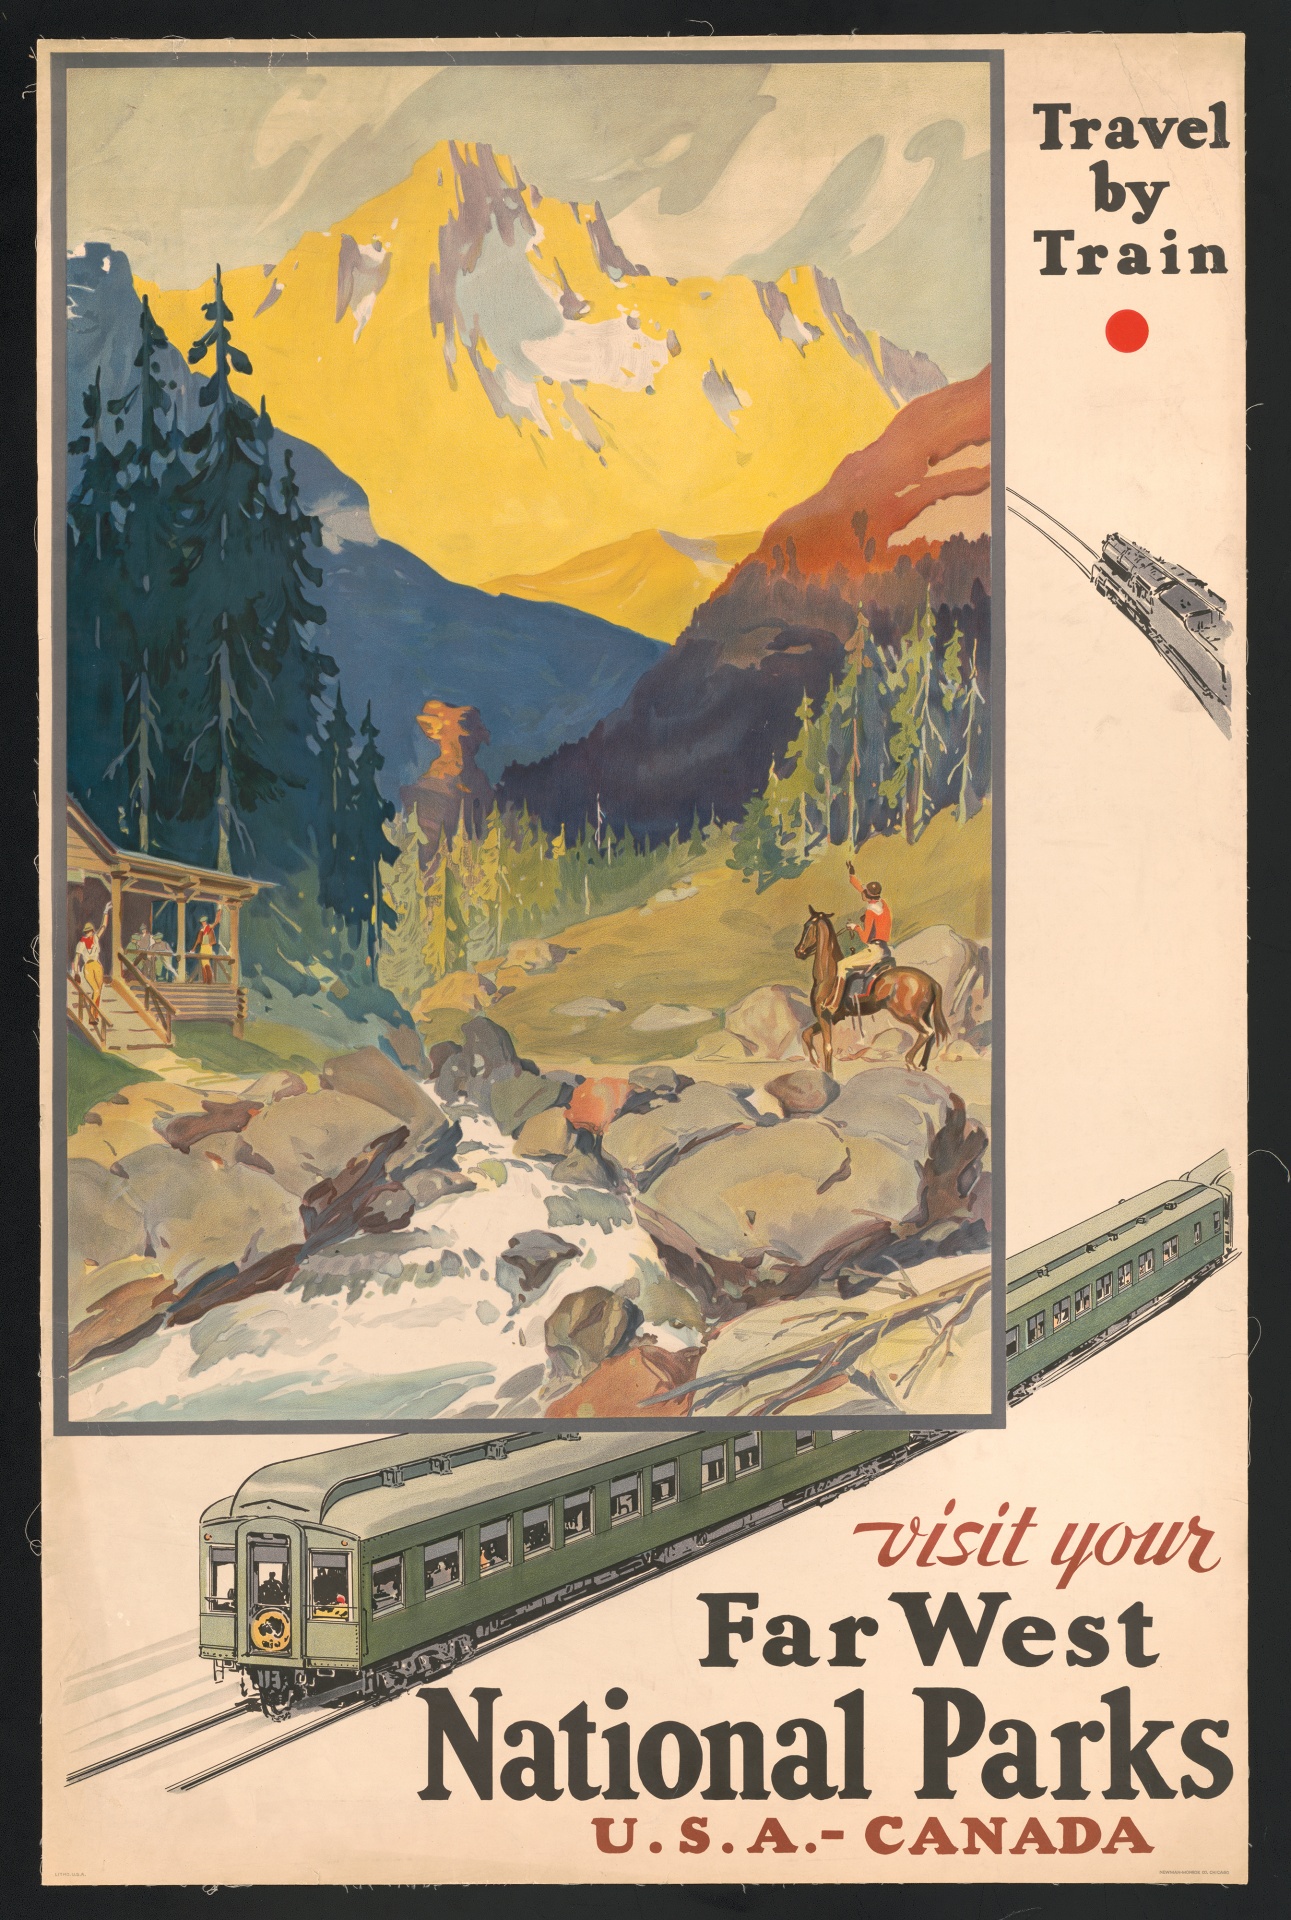 Vintage train travel poster for the Far West National Parks of Canada and USA